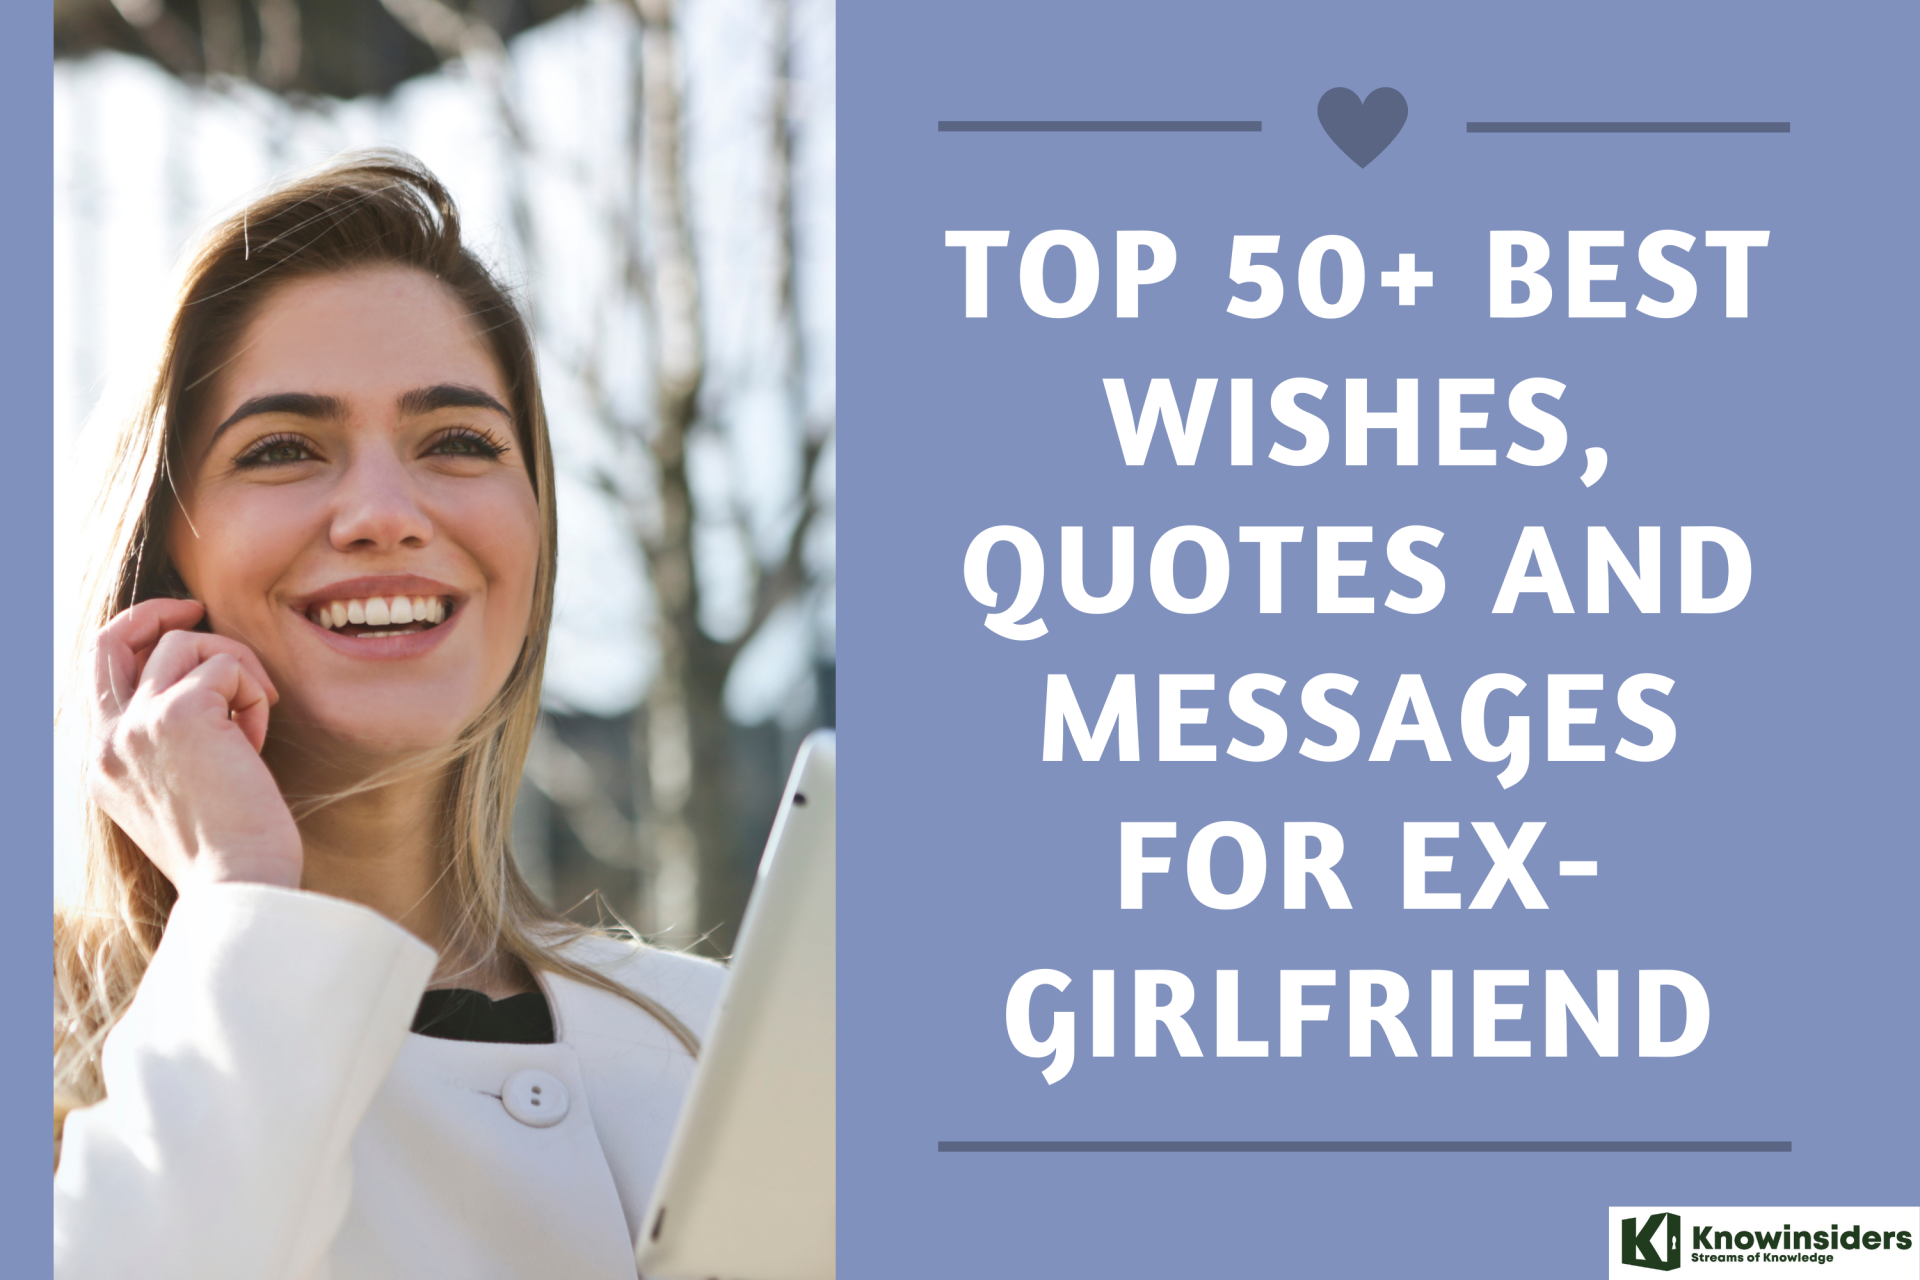 Top 50+ Best Wishes, Quotes and Messages for Ex-girlfriend